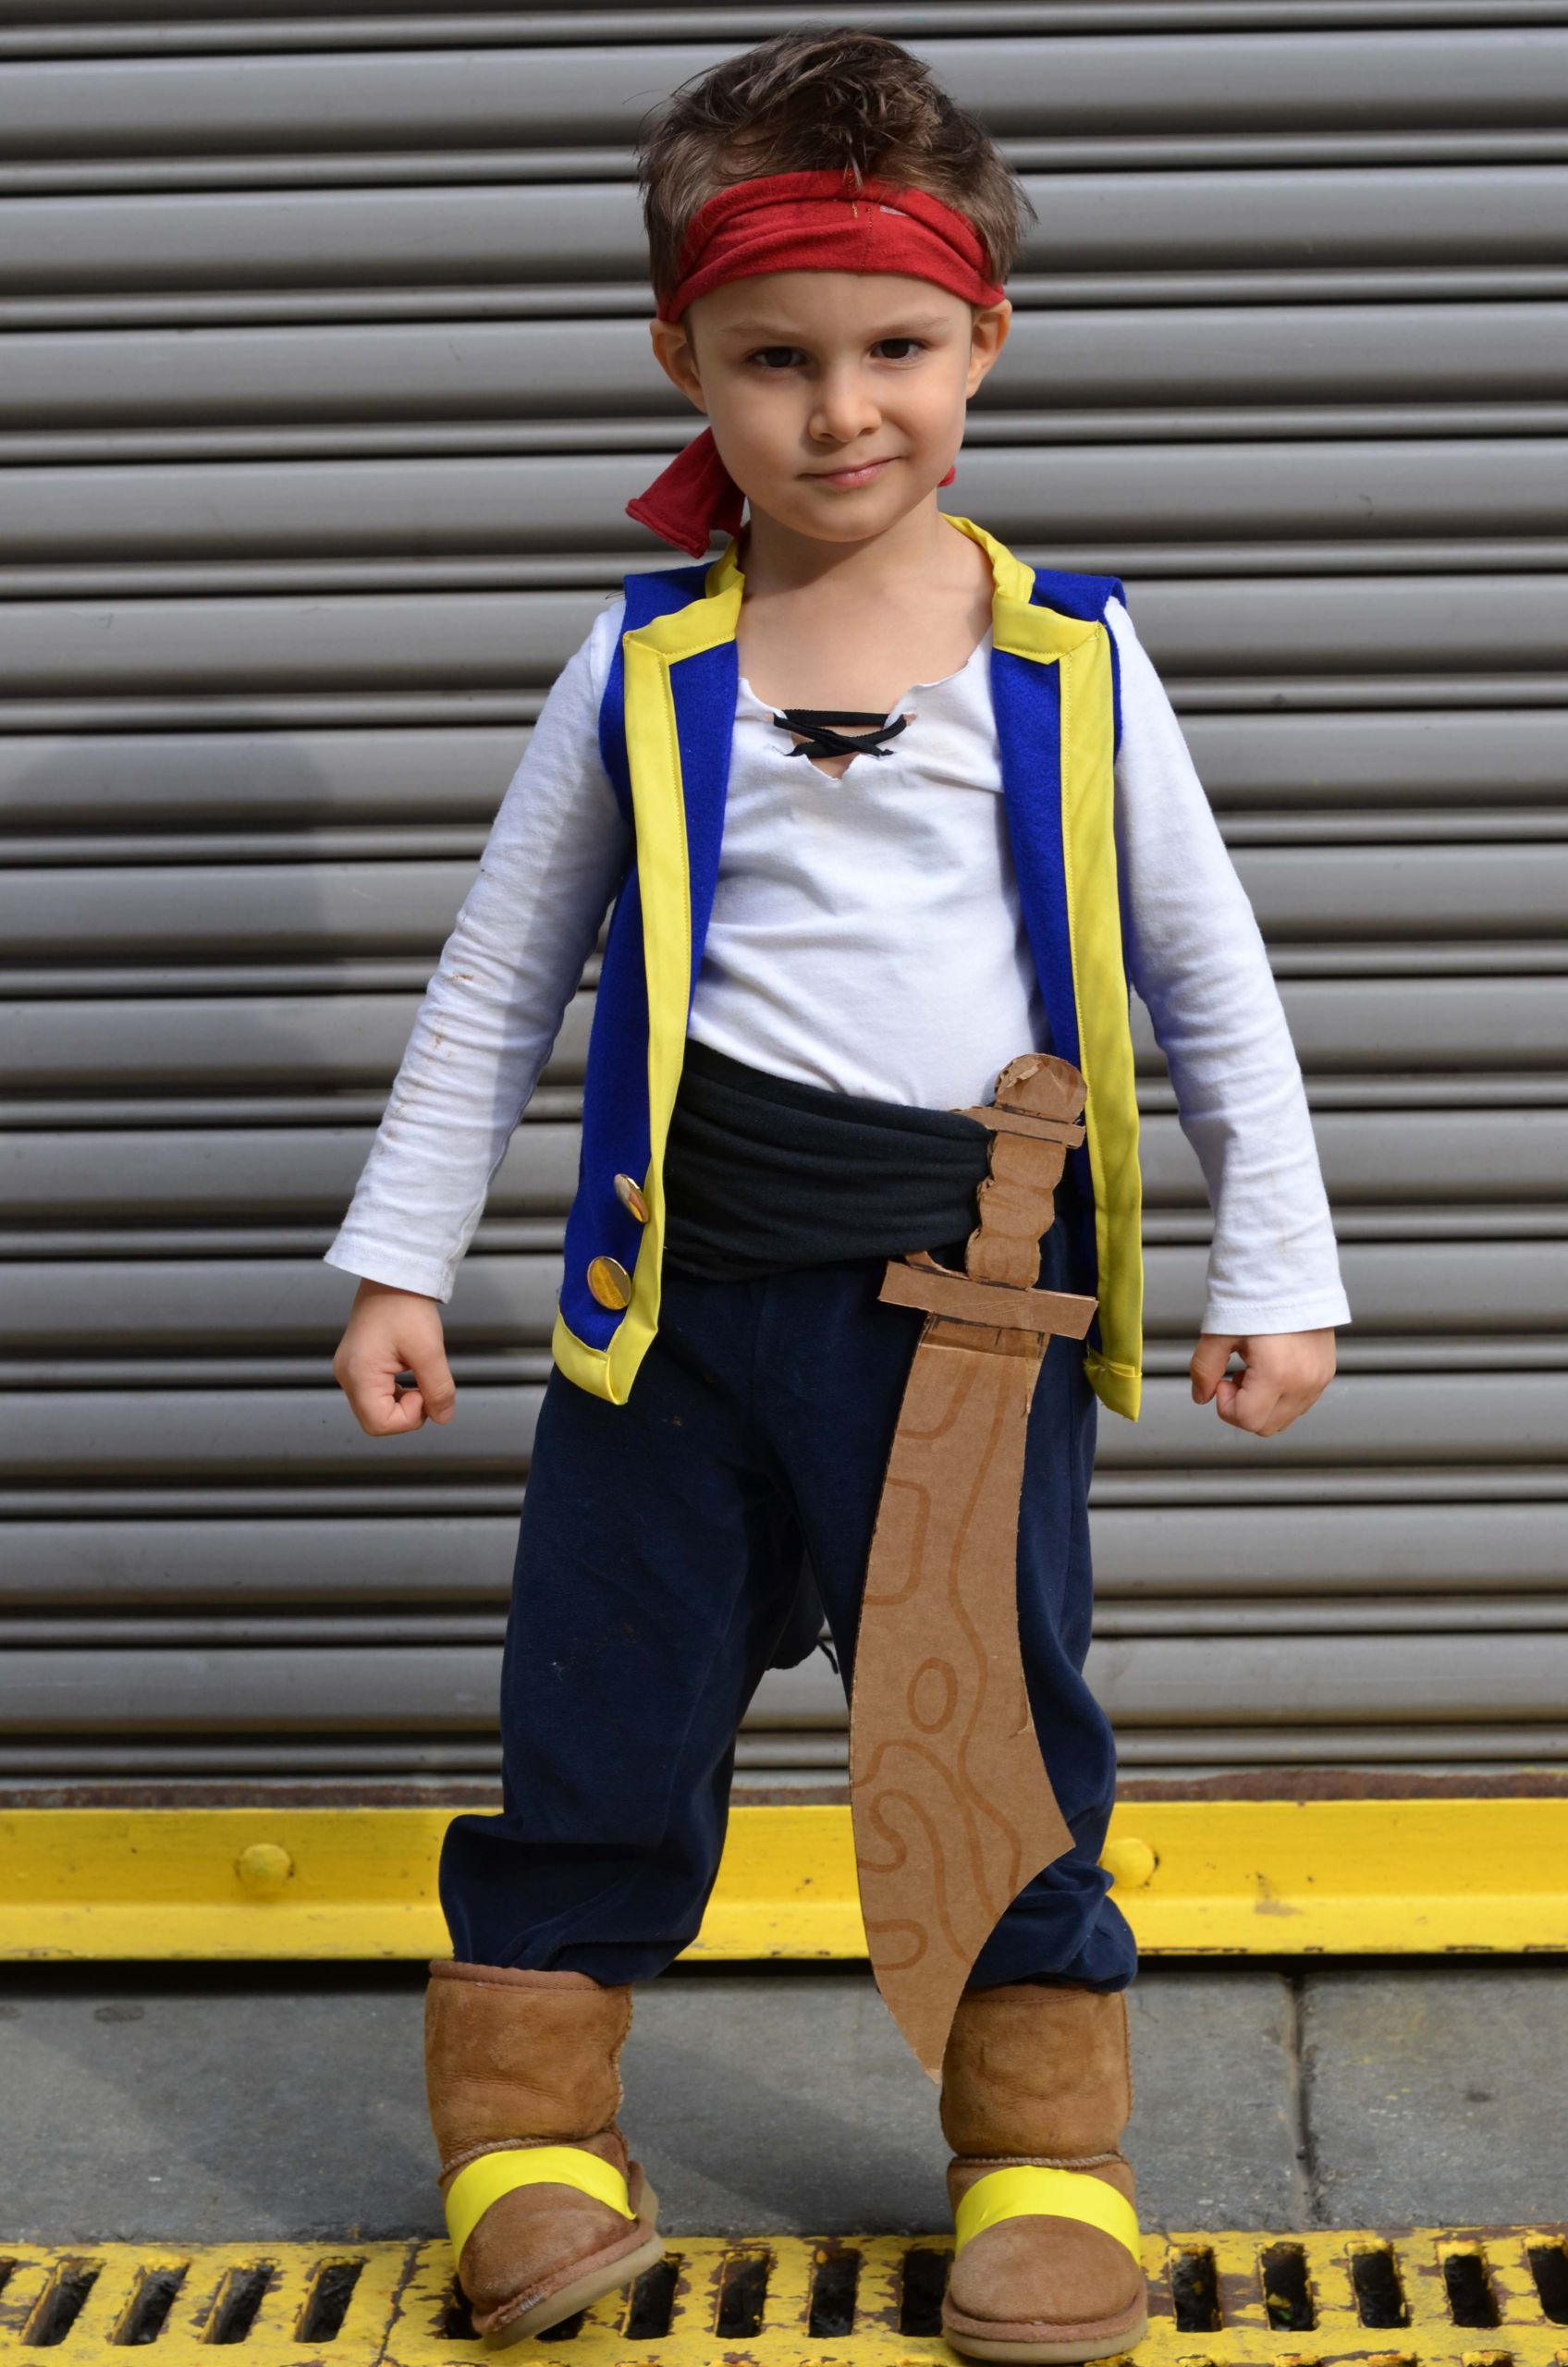 DIY Pirate Costumes For Kids
 DIY Jake and The Never Land Pirates Costume